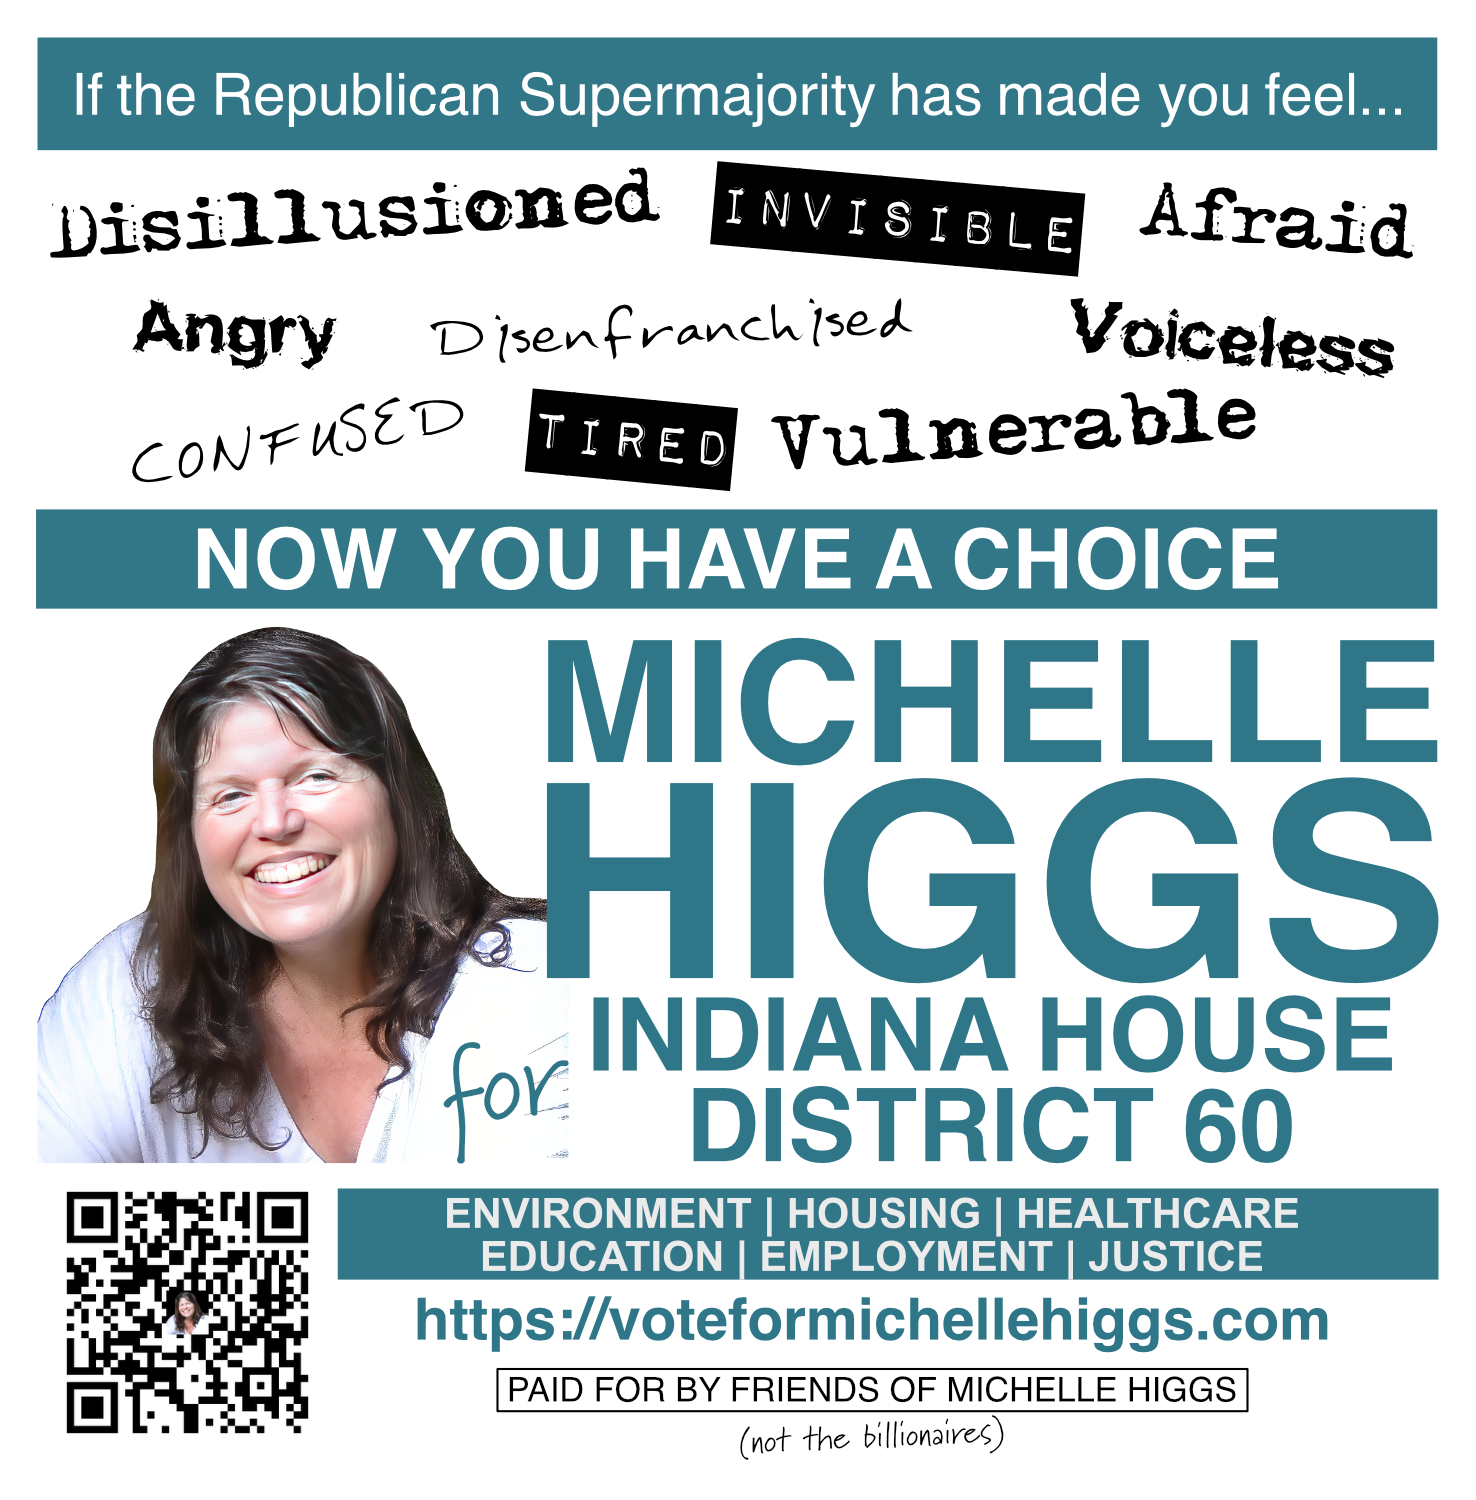 If the Republican Supermajority has made you feel...Disillusioned, Invisible, Afraid, Angre, Disenfranchised, Voiceless, Confused, Tired, Vulnerable...Now You Have A Choice. Michelle Higgs for House District 60. Environment | Housing | Healthcare | Education | Employment | Justice https://voteformichellehiggs.com  Paid for by Friends of Michelle Higgs, not the billionaires